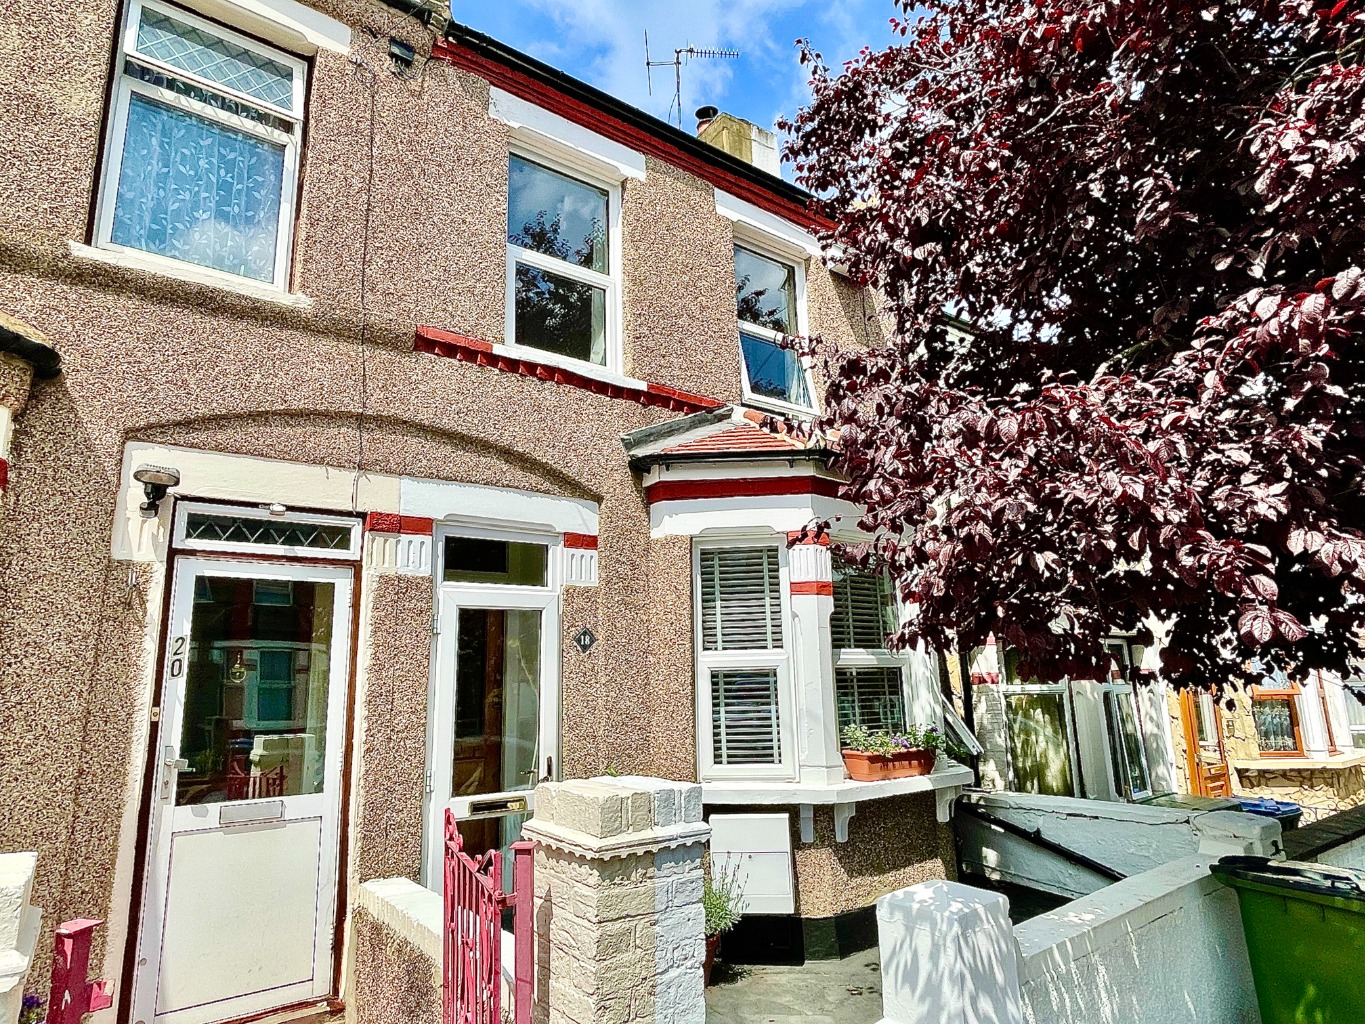 The property is situated in a quiet and residential location, very conveniently set for local shops, bus routes, mainline station and parkland, this house will make a fantastic home for the next buyers, as it has been for the current owners for some 10 years.